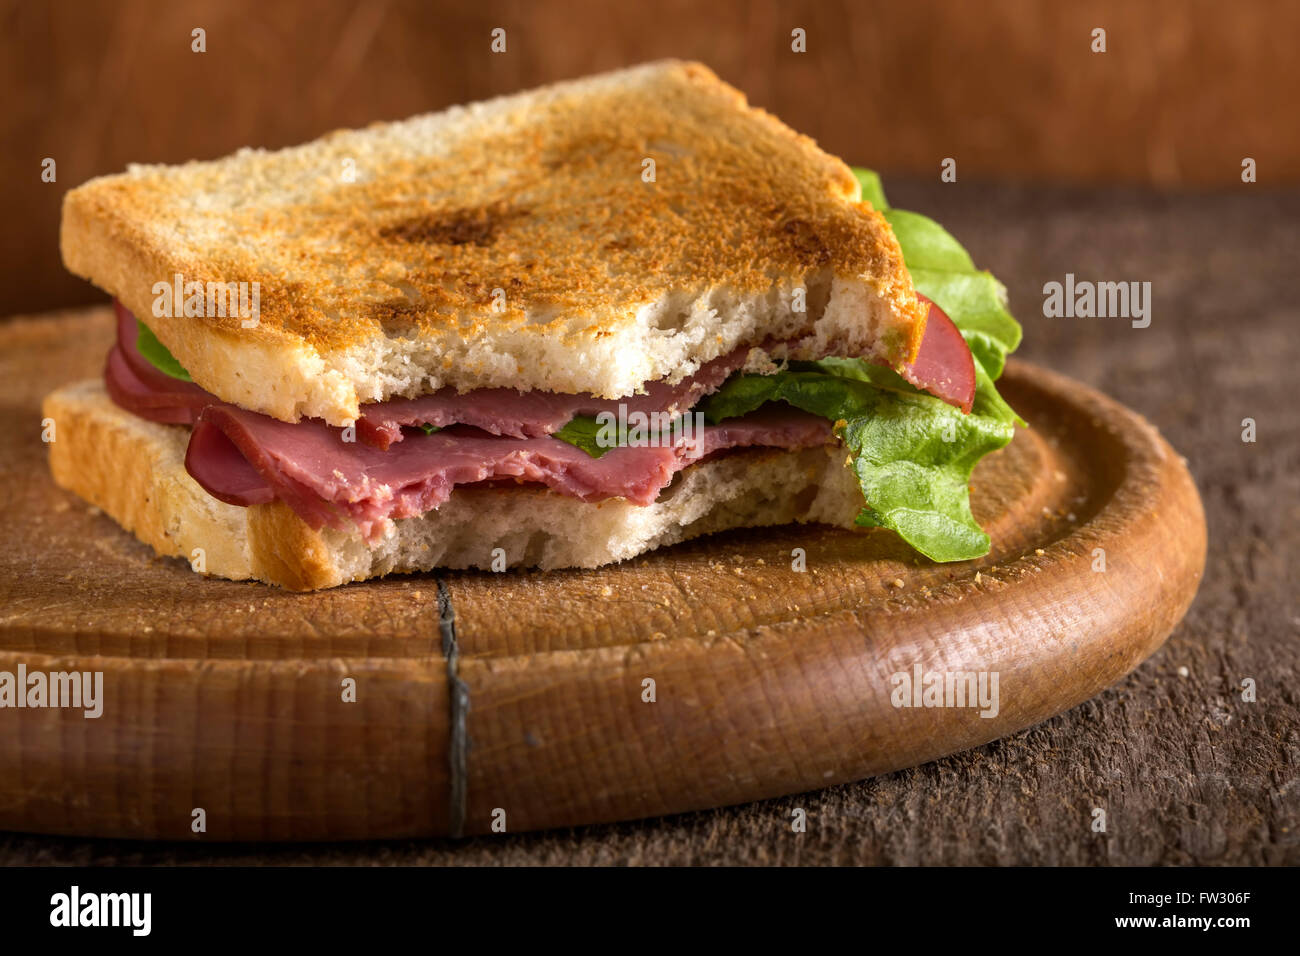 Bitten beef pastrami sandwich with lettuce and tomato over wooden background Stock Photo